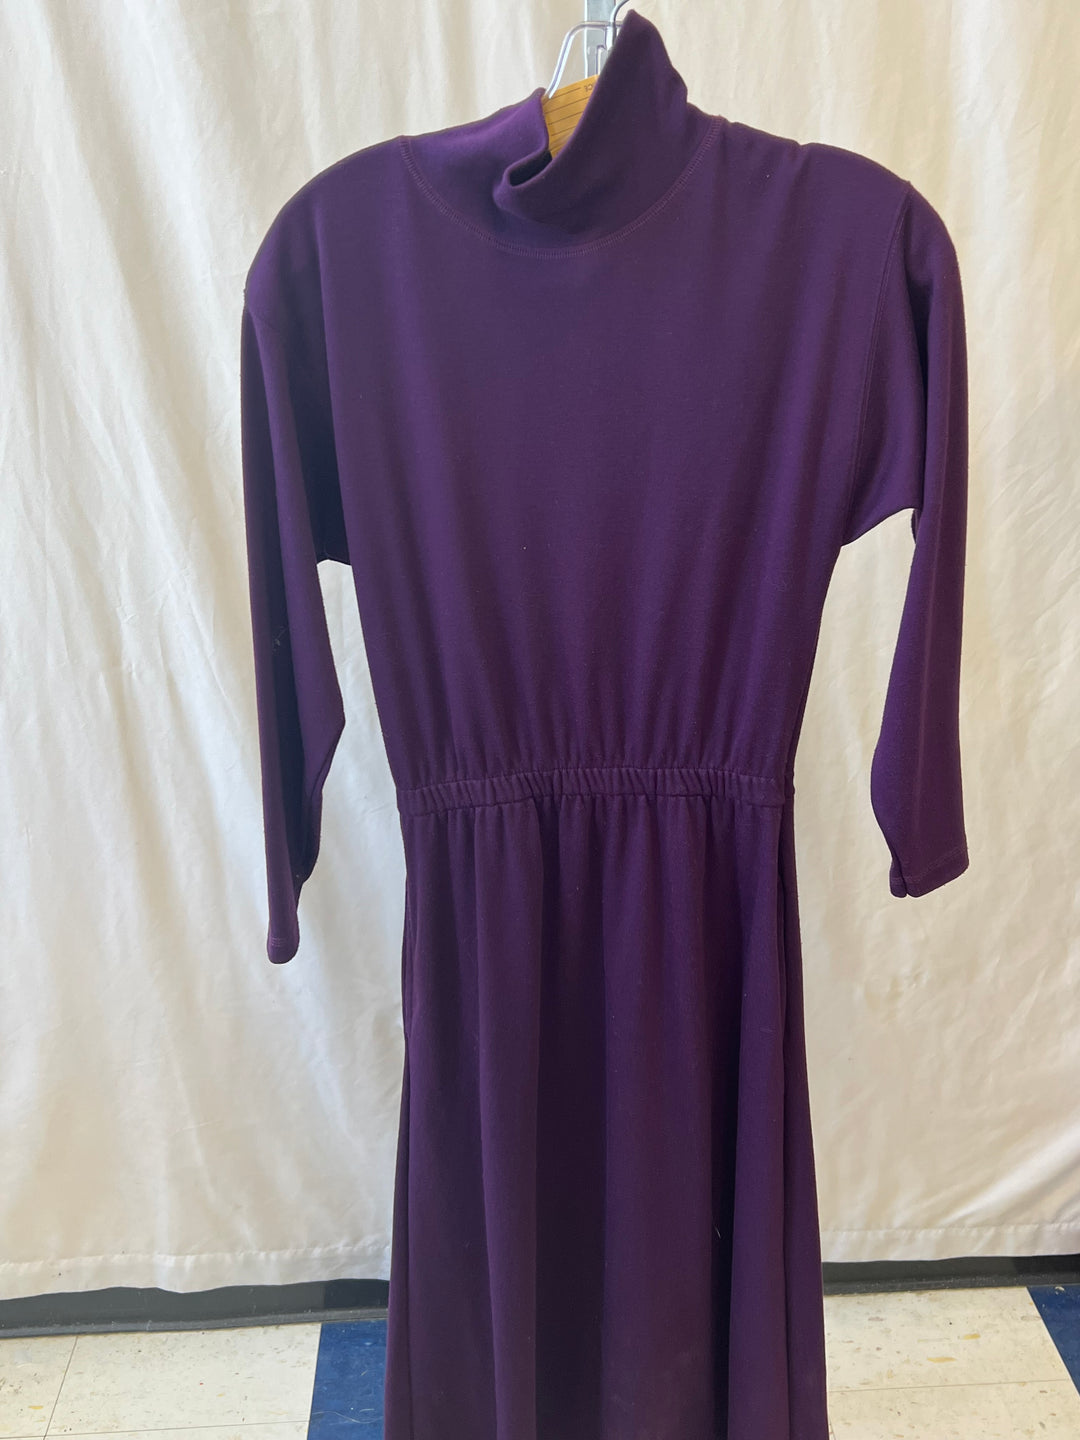 LL Bean Small Purple Long Dresses with Long Sleeves